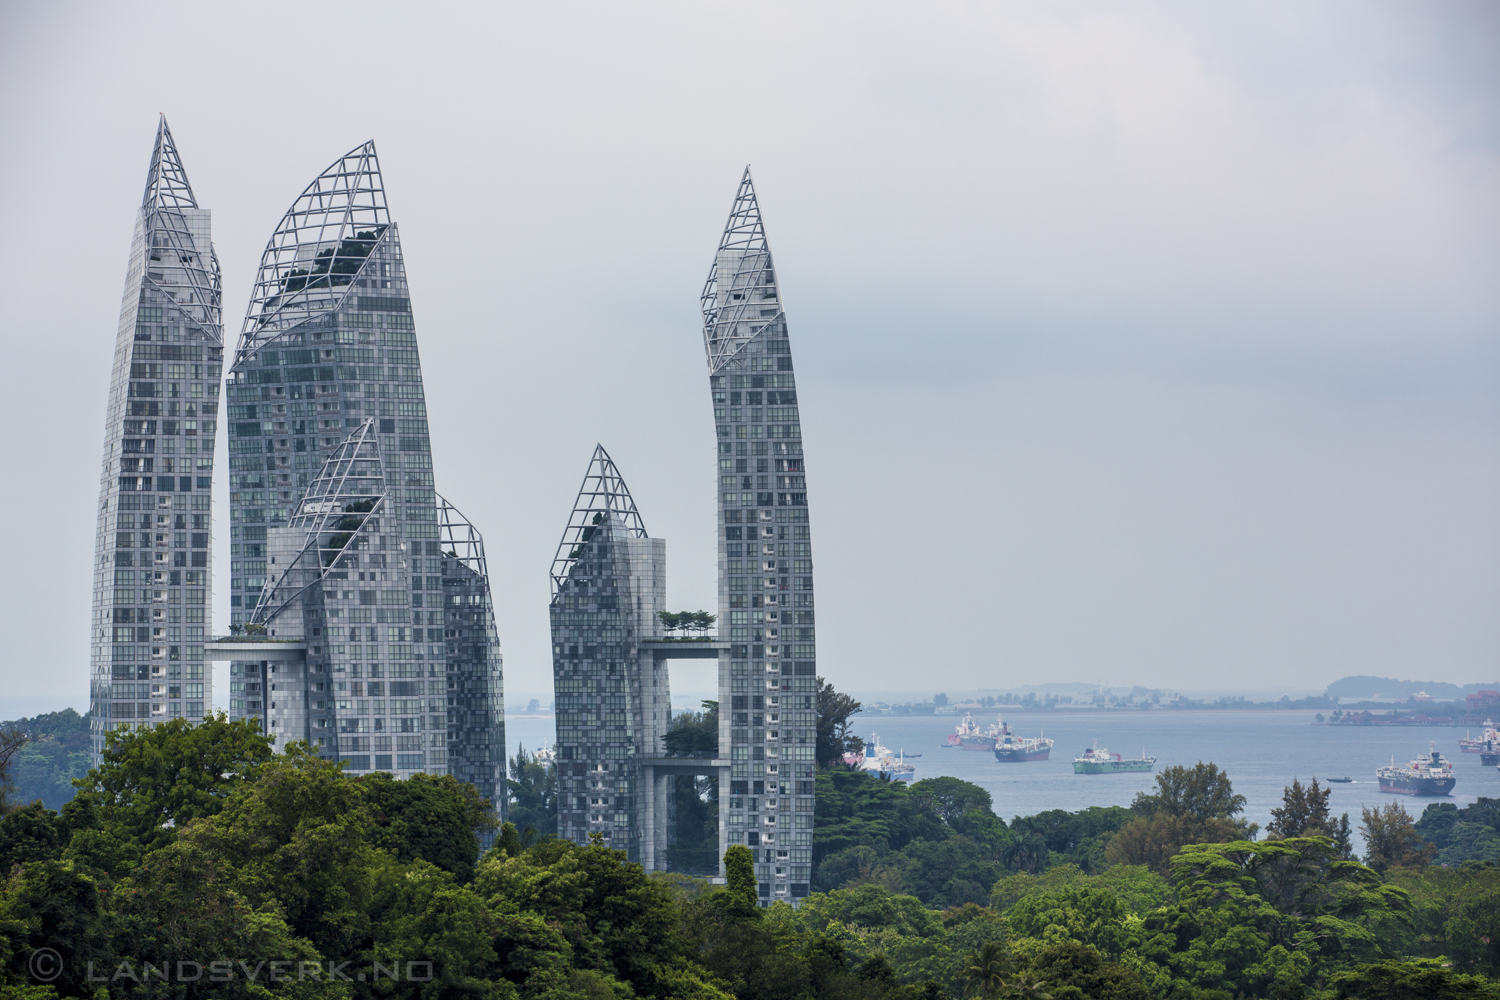 Keppel Bay, Singapore. 

(Canon EOS 5D Mark III / Canon EF 70-200mm f/2.8 L IS II USM)